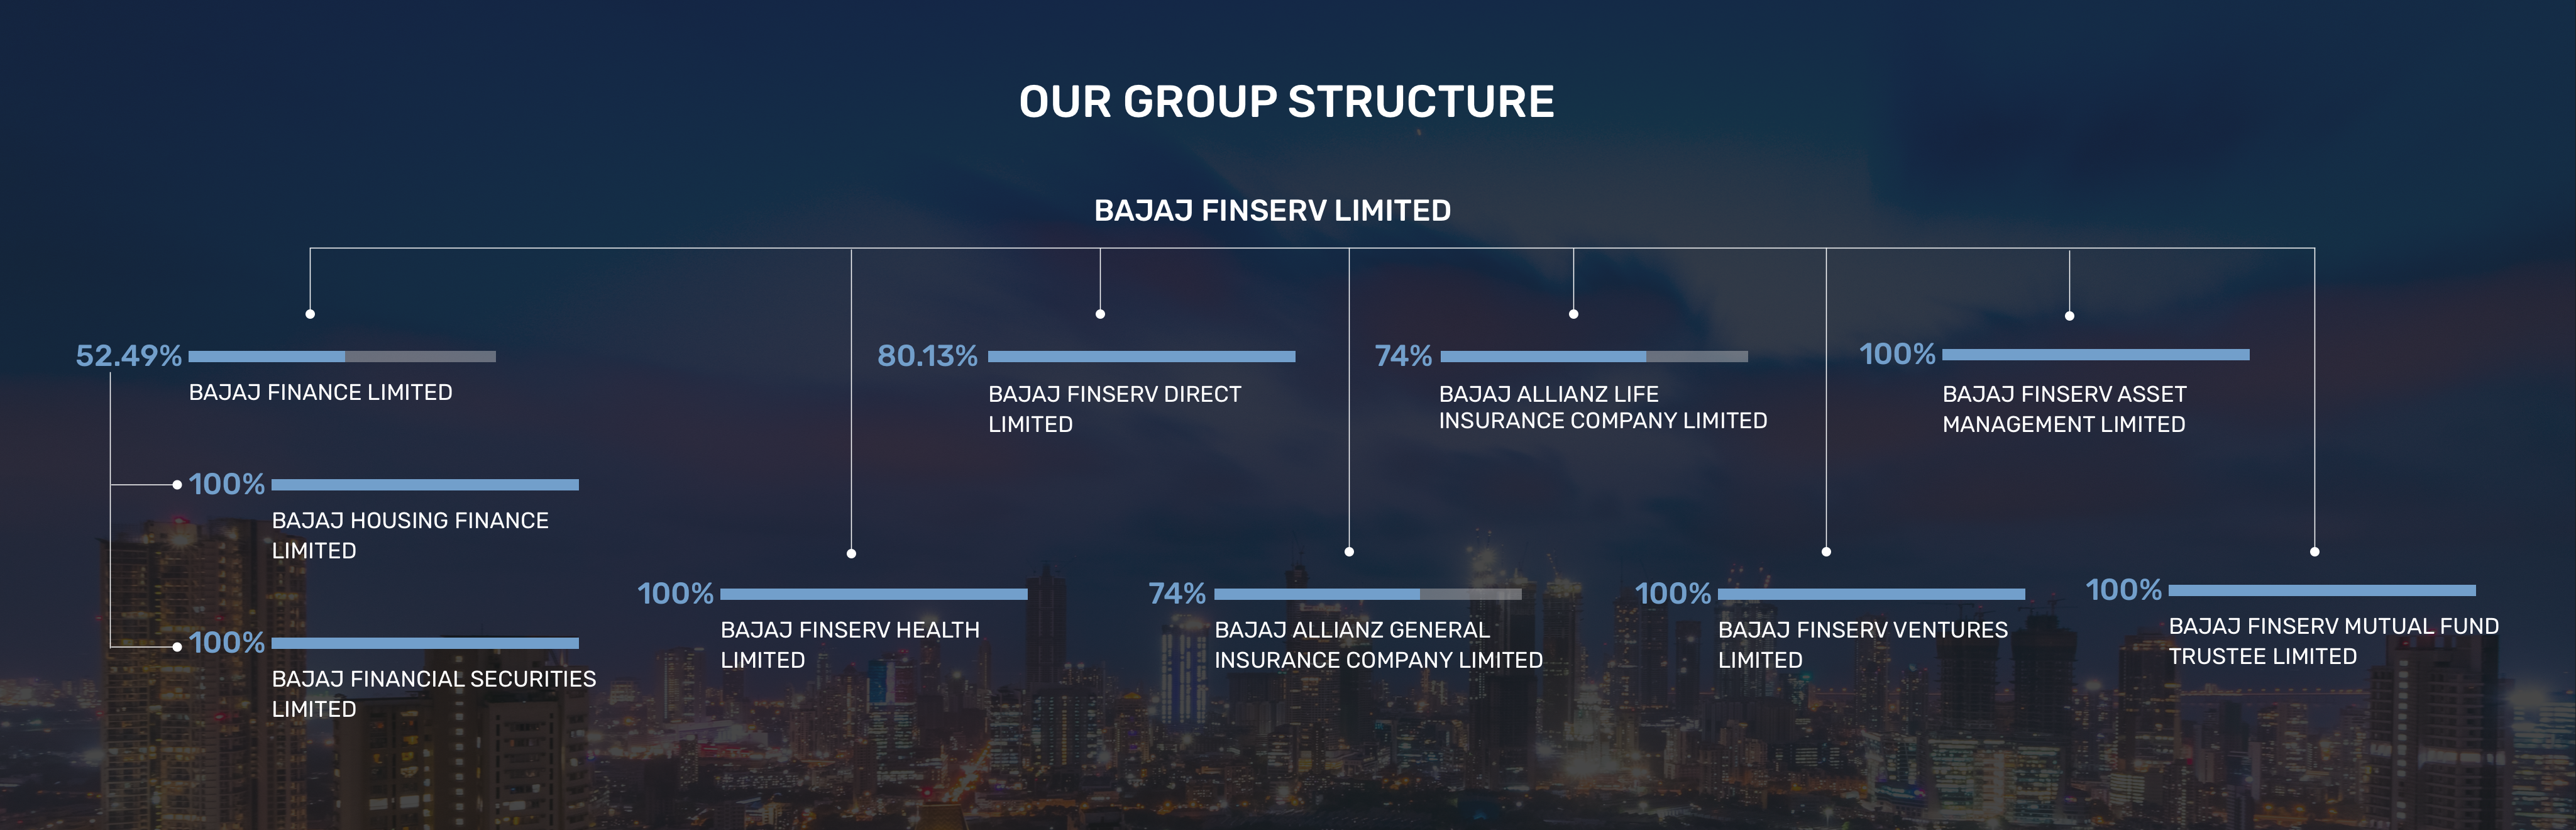 Group Structure